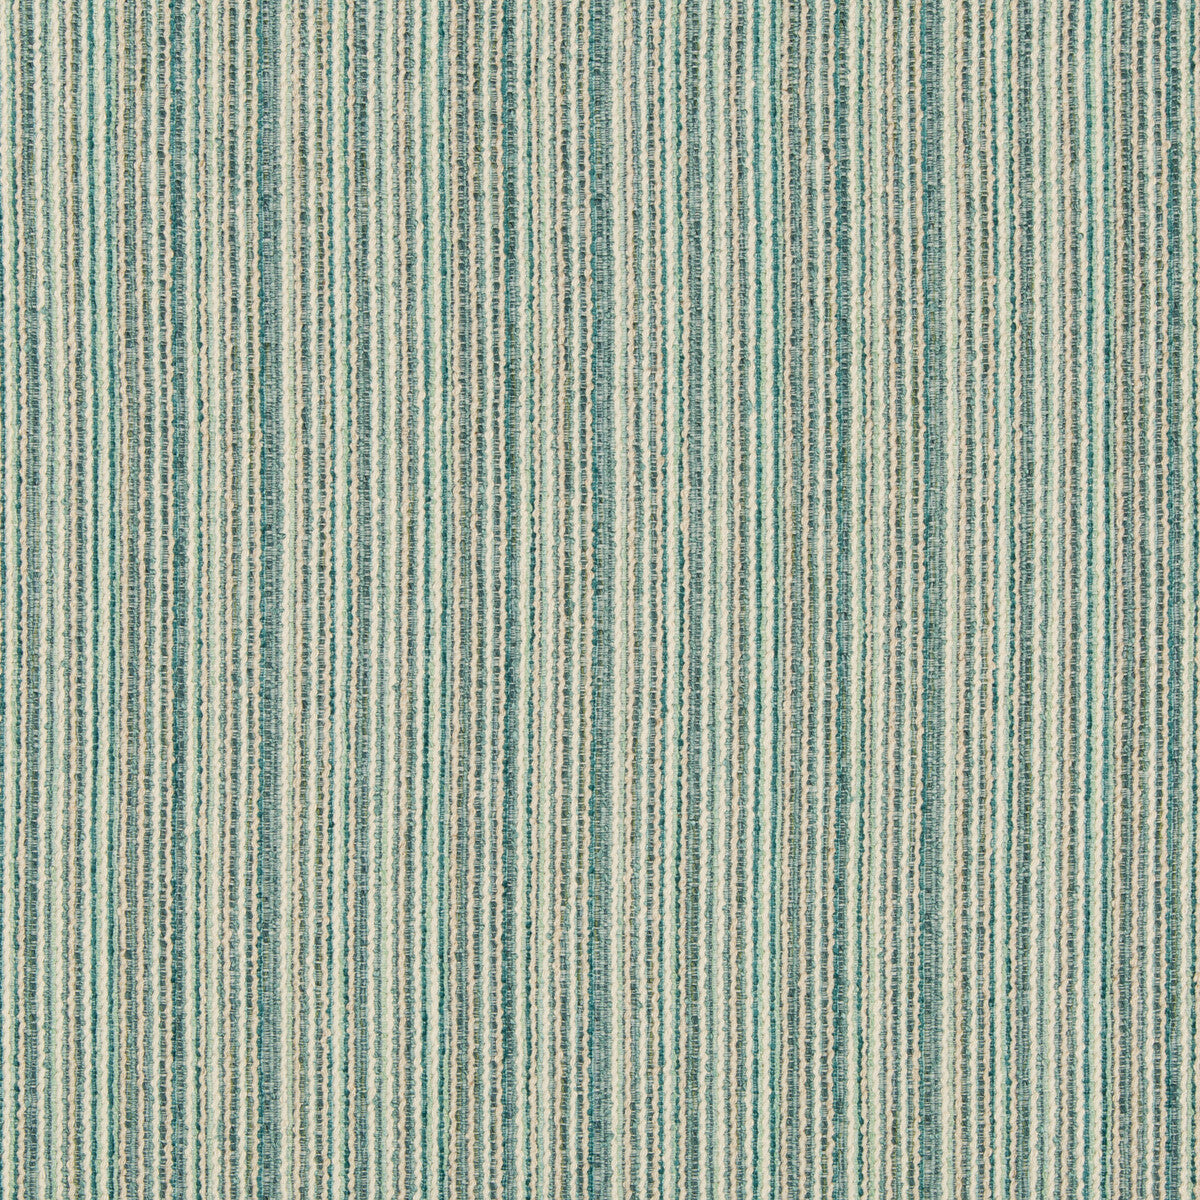 Kravet Contract fabric in 35033-1613 color - pattern 35033.1613.0 - by Kravet Contract in the Incase Crypton Gis collection